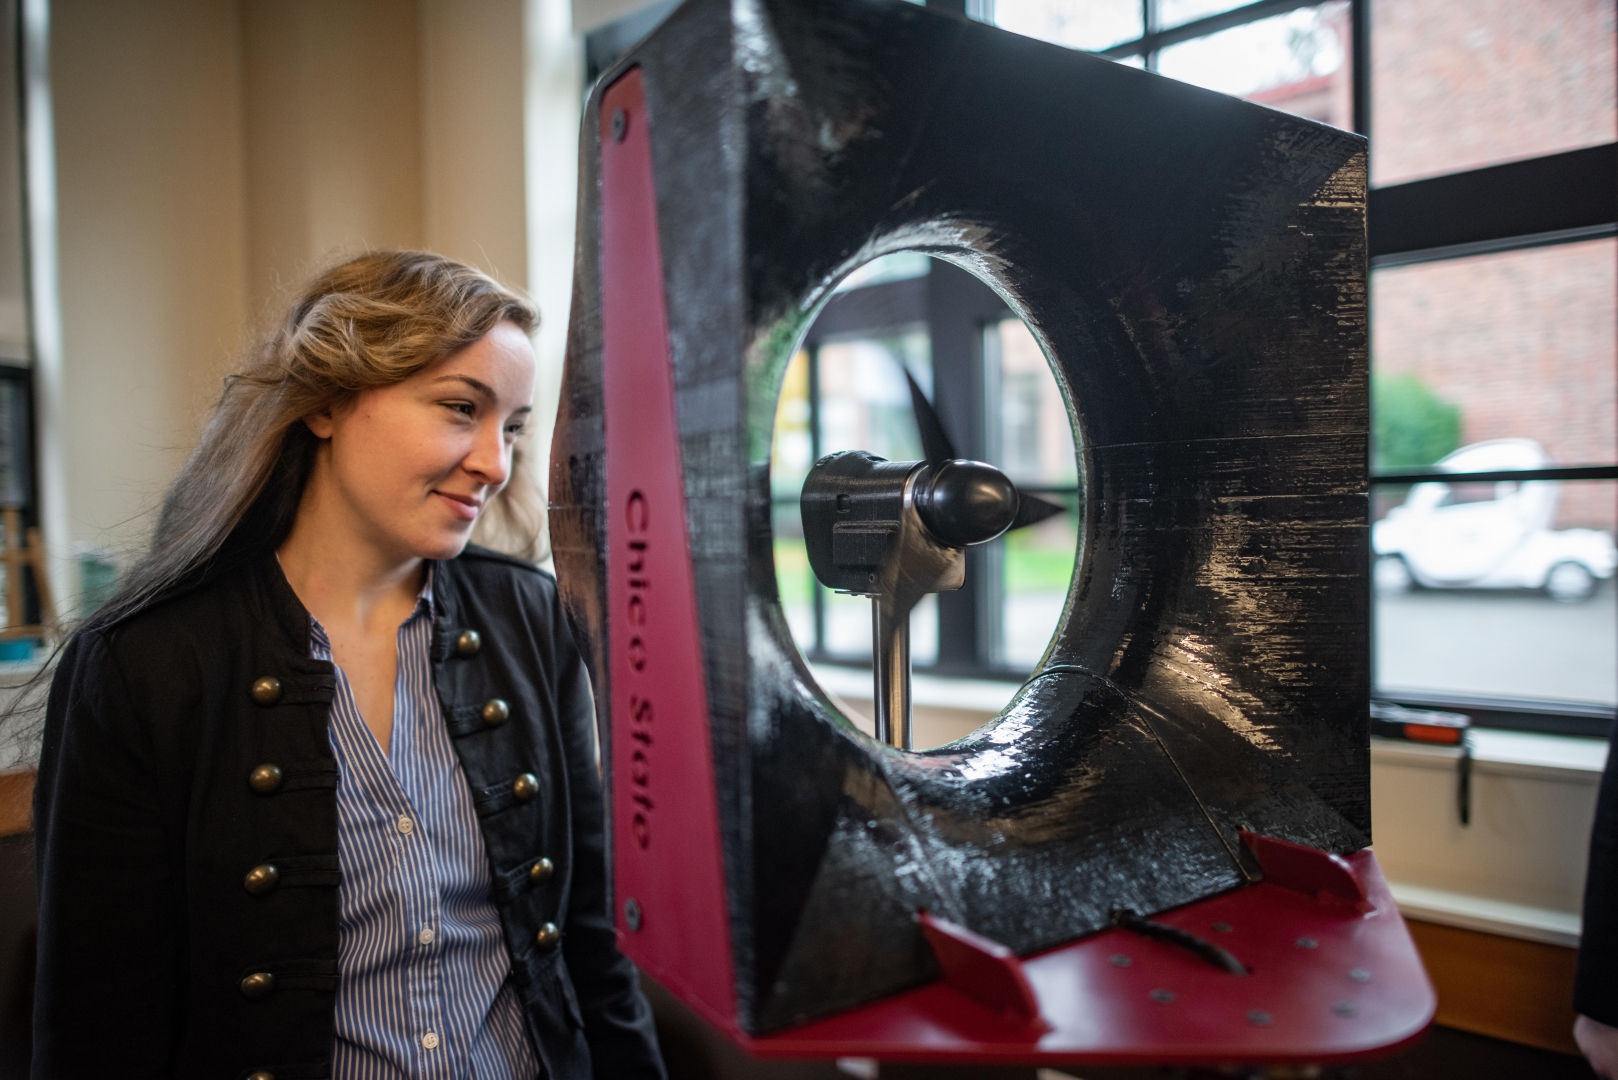 Kate Gordon looks into a wind tunnel as it blows her hair back.